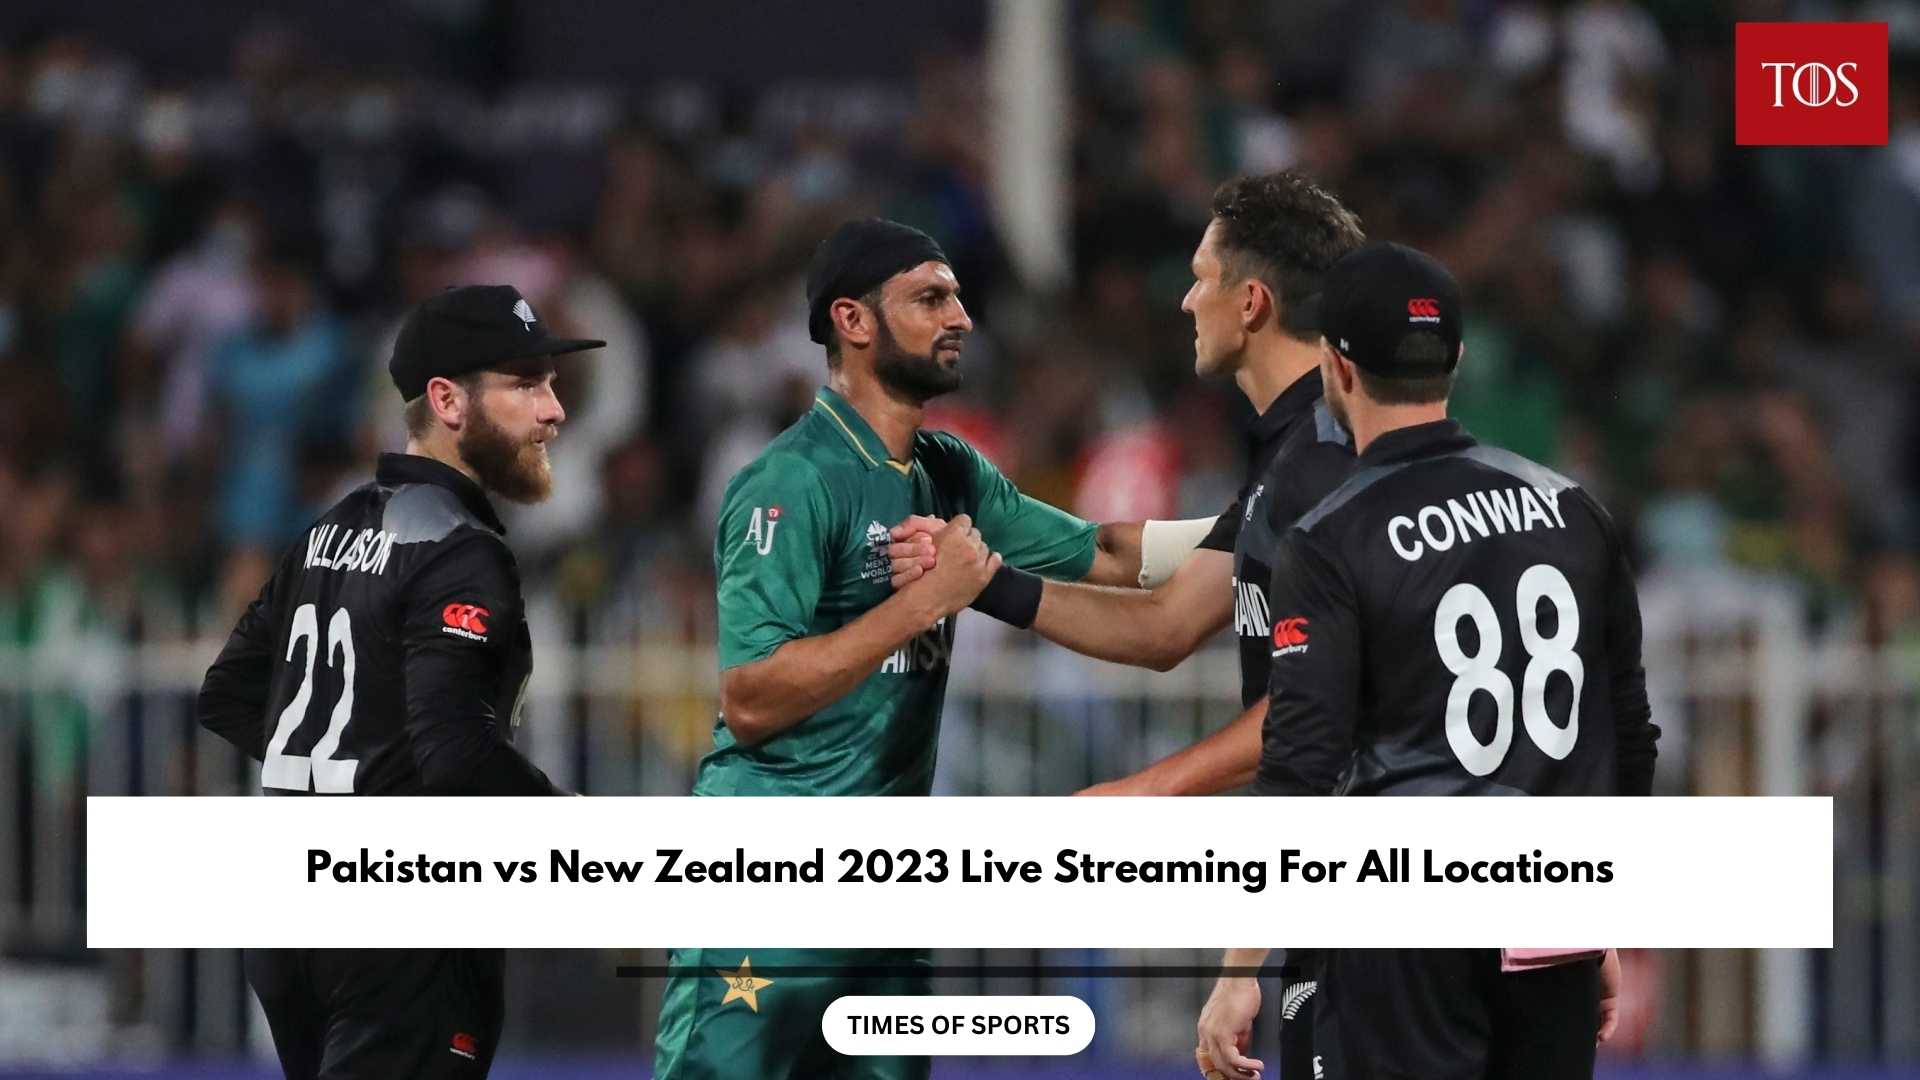 PAK vs NZ 2023 Live Streaming For All Locations